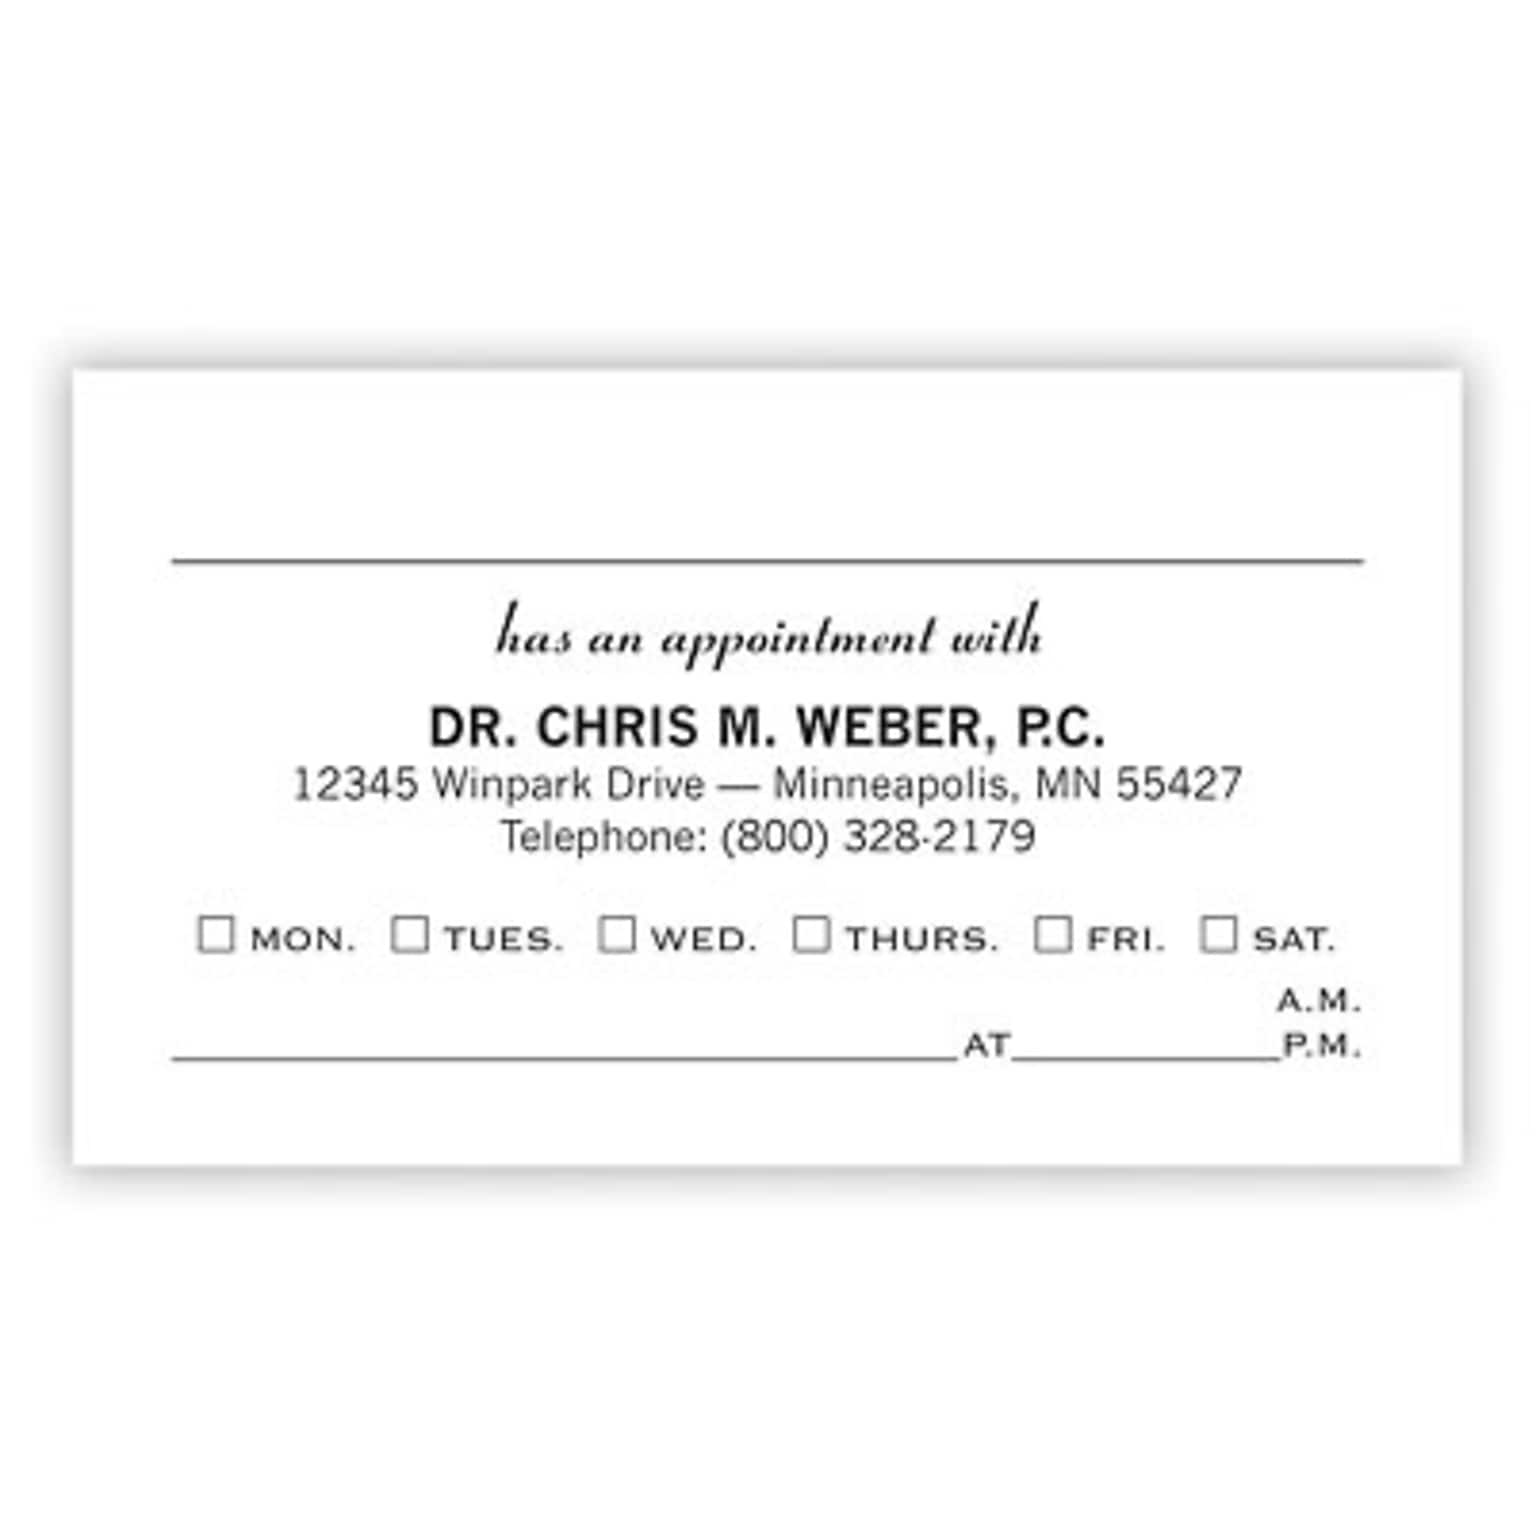 Custom 1-2 Color Appointment Cards, White Vellum 80#, Raised Print, 2 Standard Inks, 2-Sided, 250/Pk